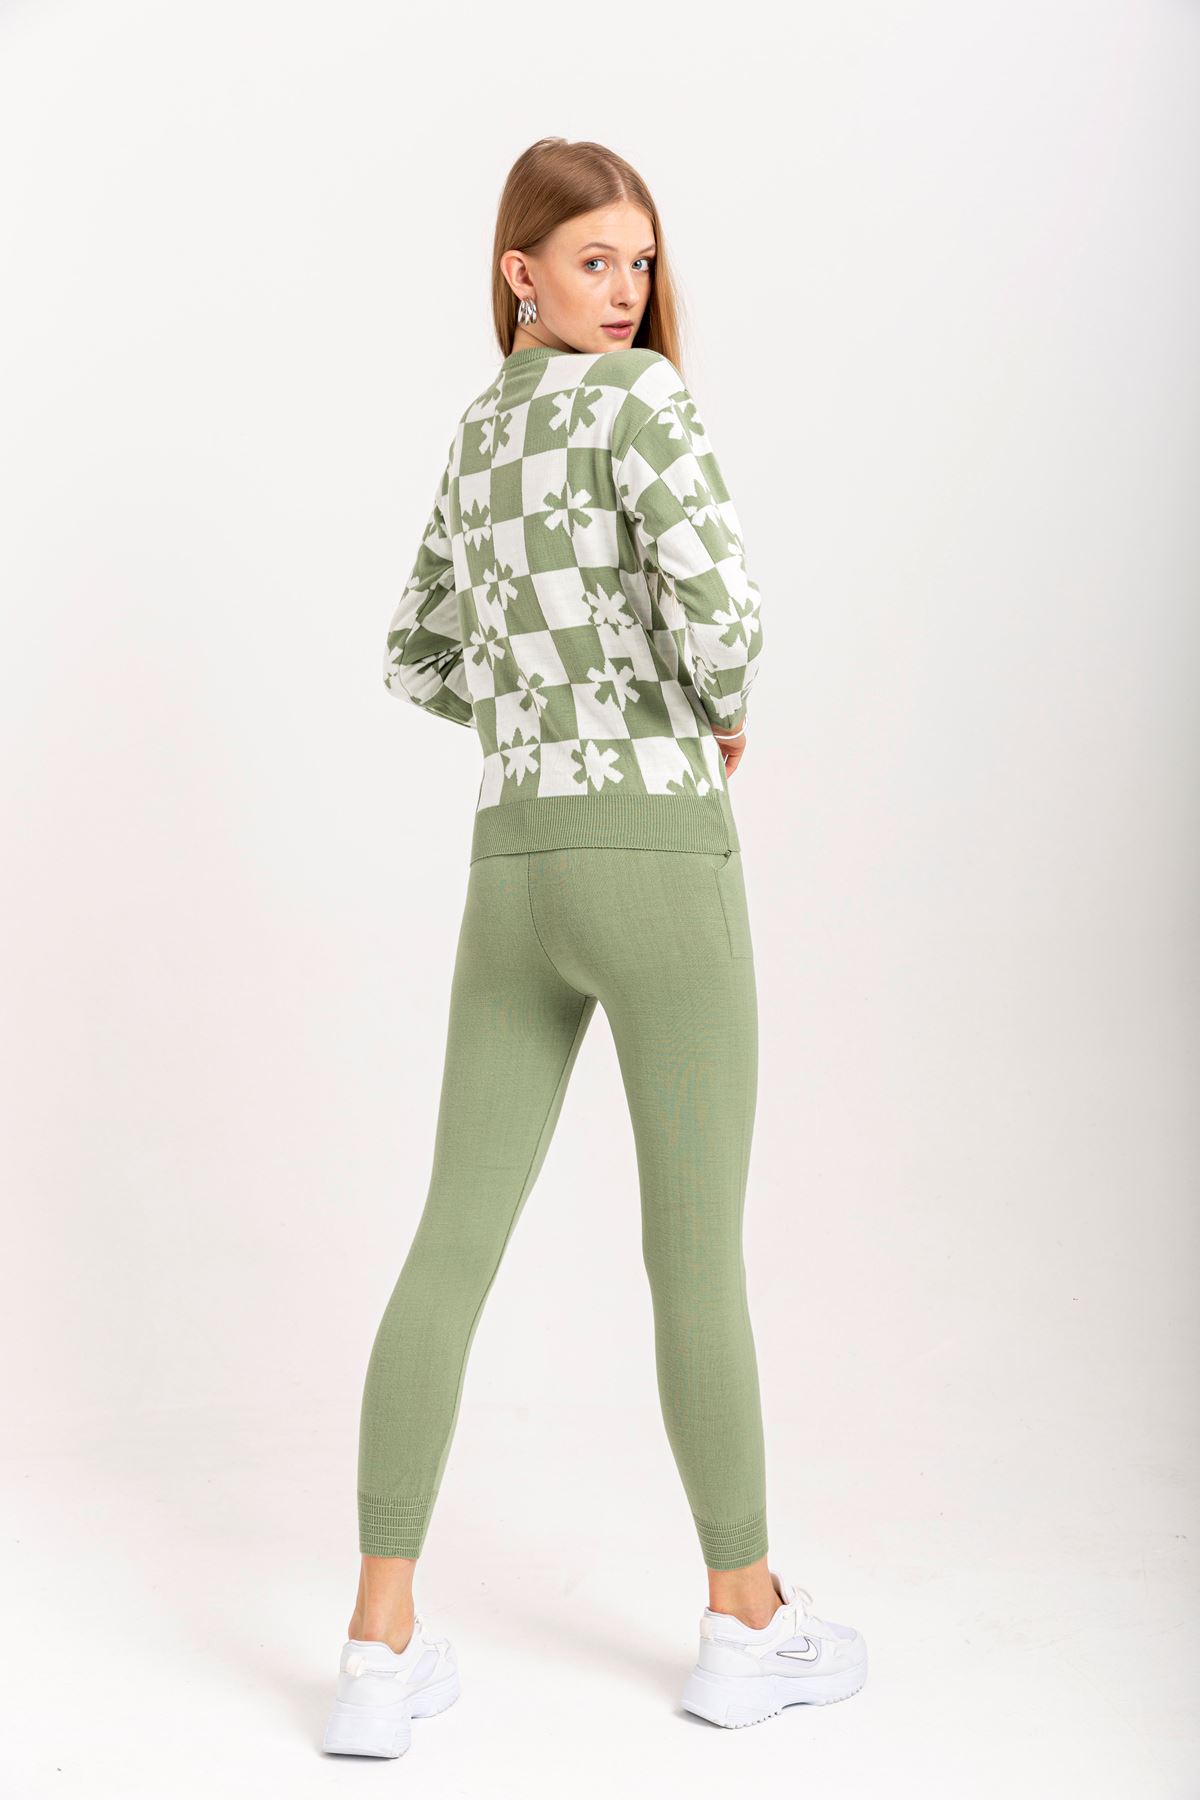 Knitwear Fabric Long Sleeve Bicycle Collar Checkerboard Print Women'S Knitwear Set 2 Pieces - Mint